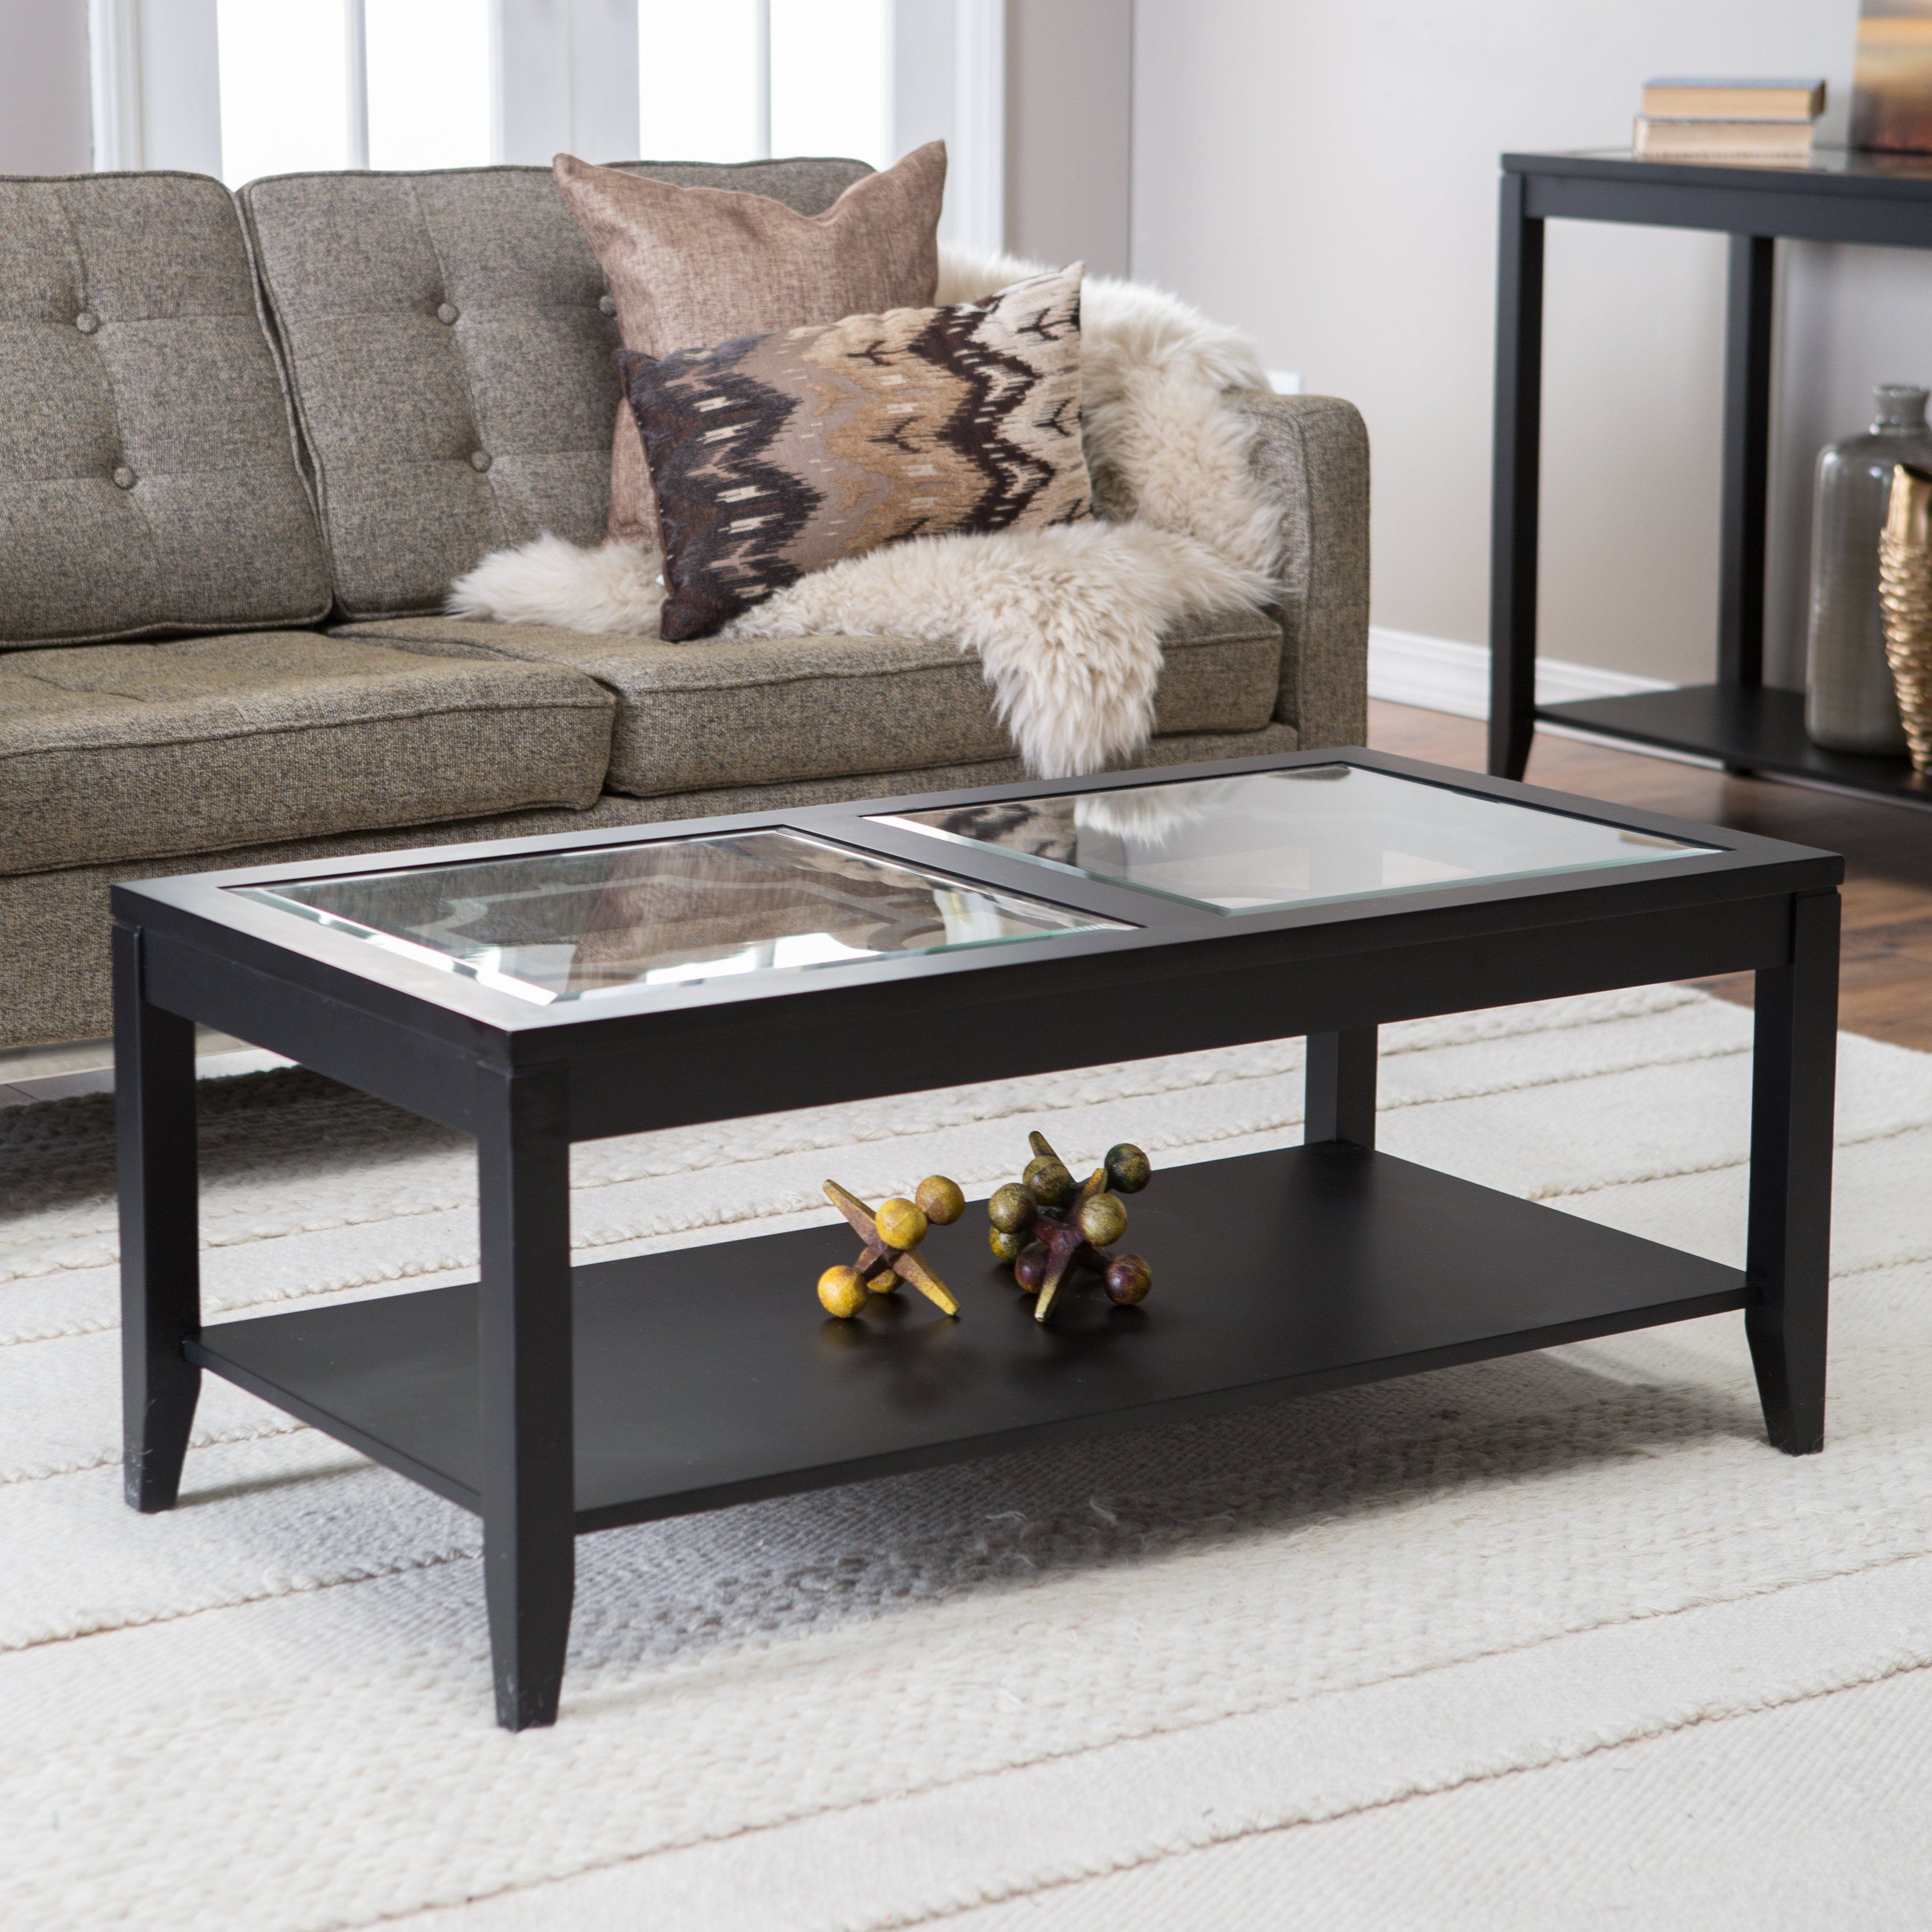 Glass Rectangular Coffee Table I Simply Wont Ever Be Able To Look At It In The Same Way Again Best Professionally Designed Good Luck To All Those Who Try (View 6 of 10)